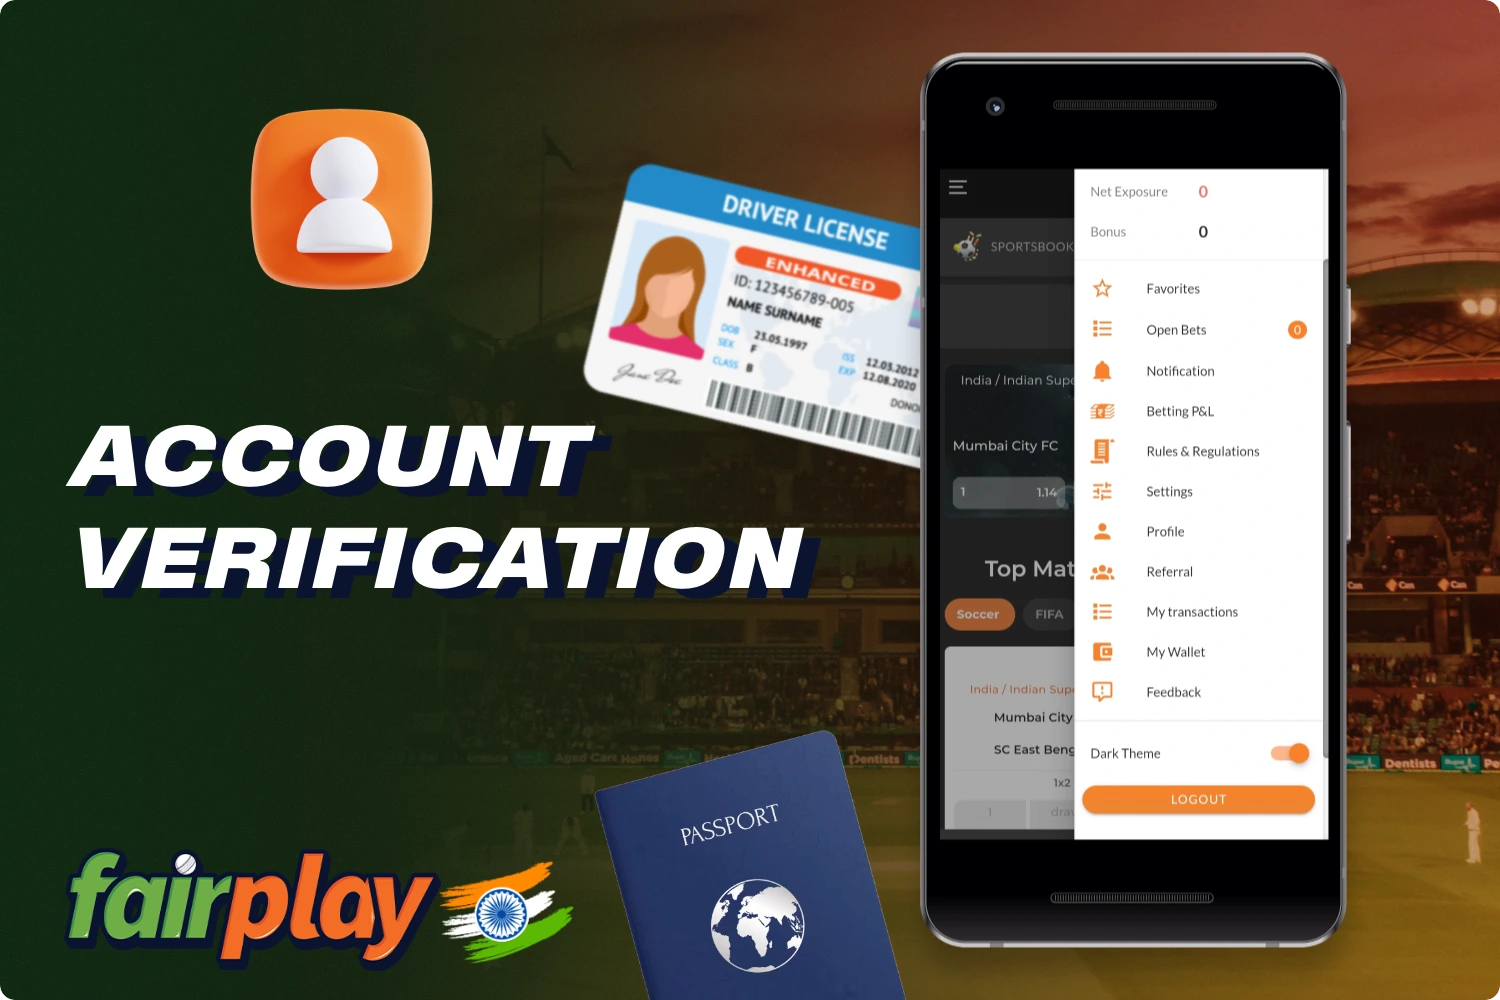 In order to be able to withdraw money from Fairplay you need to confirm your identity once